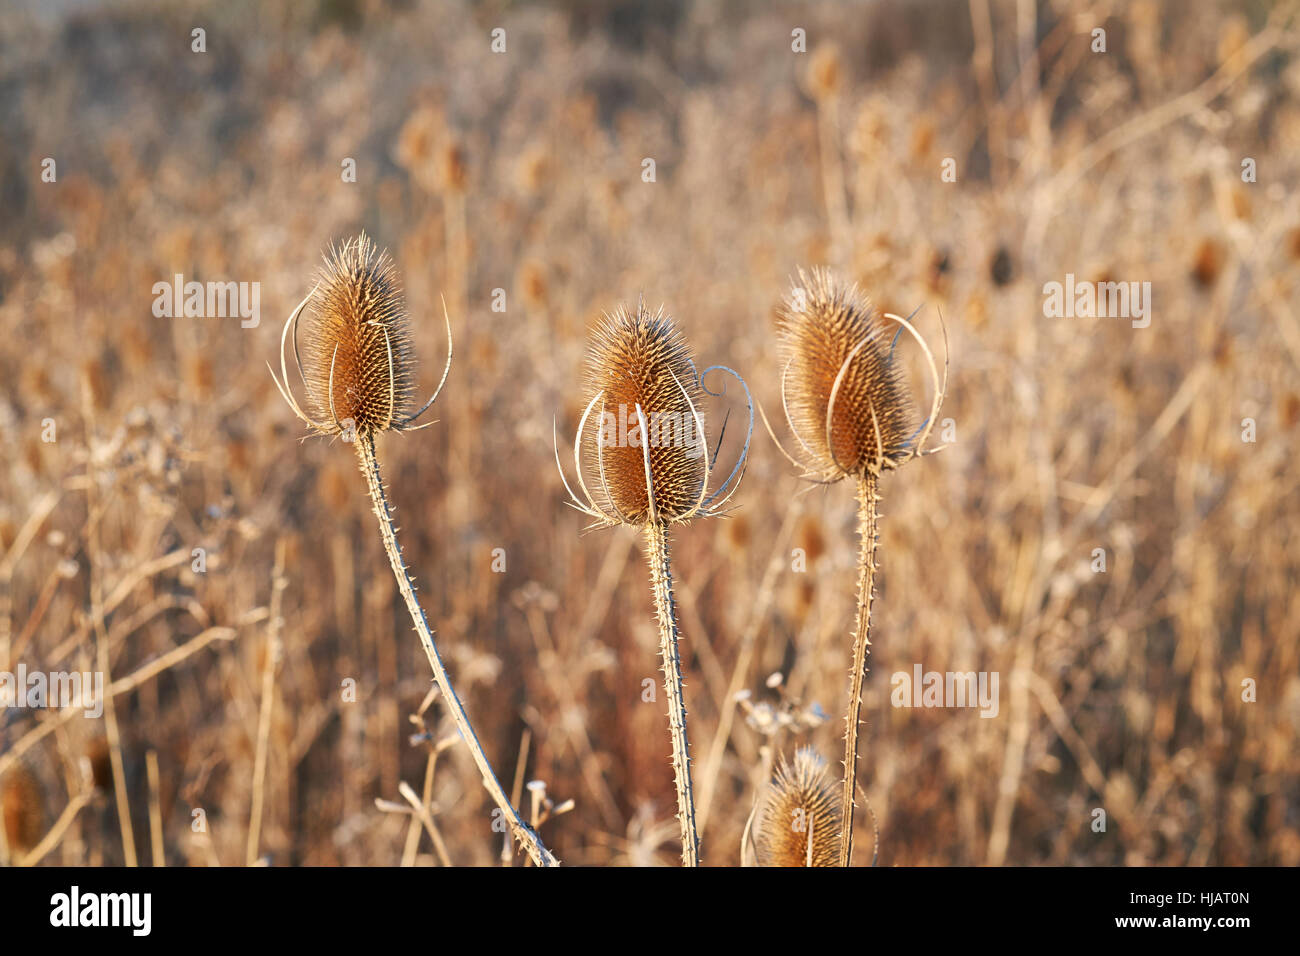 Teasel (Dipsacus fullonum) plants during winter dieback displaying dead conical flower heads and dried out stems. England, UK. Stock Photo